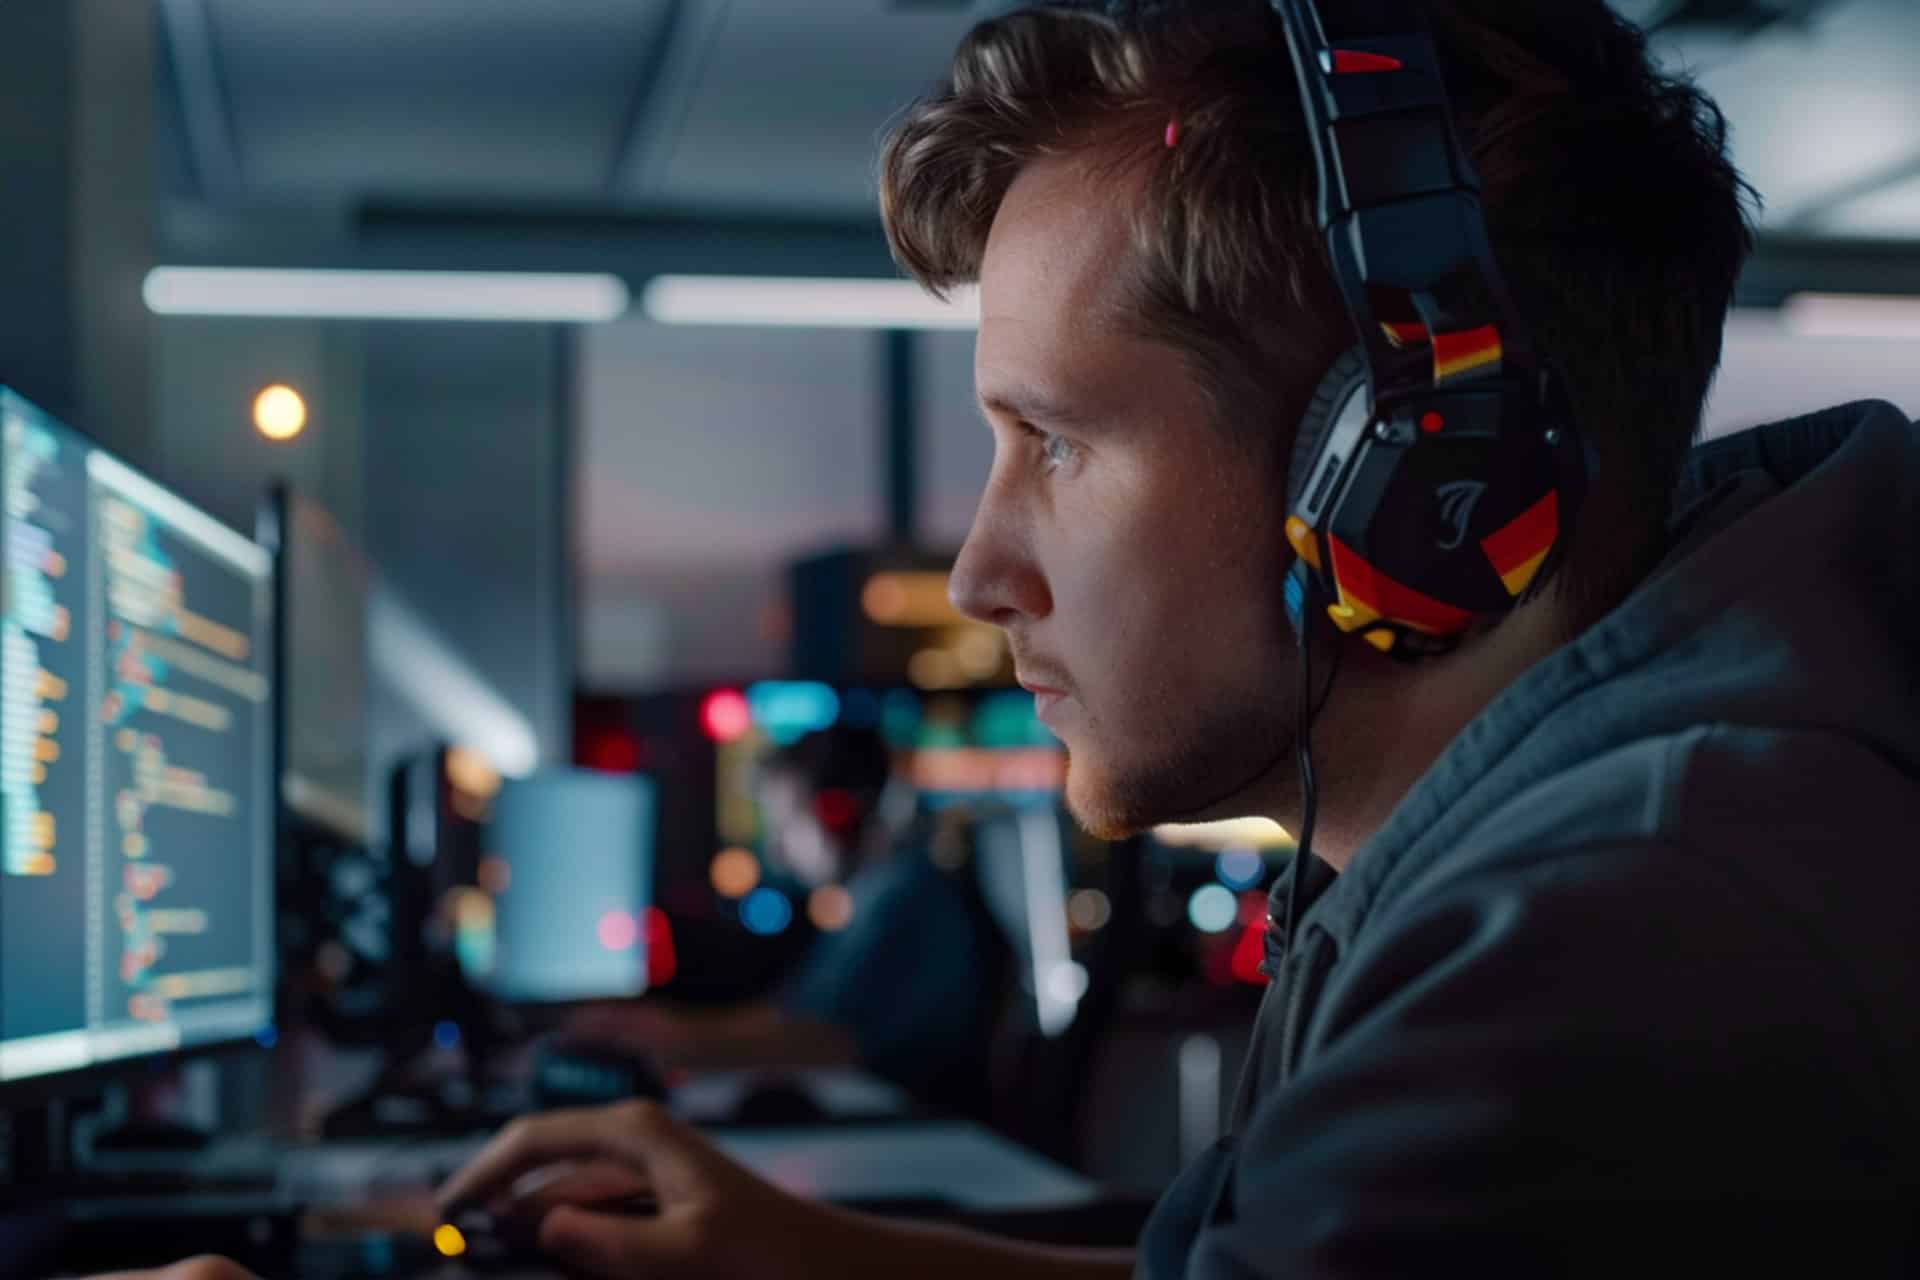 A young man with headphones sits at a desk in front of multiple computer monitors in a dimly-lit room, with a blurred German flag in the background